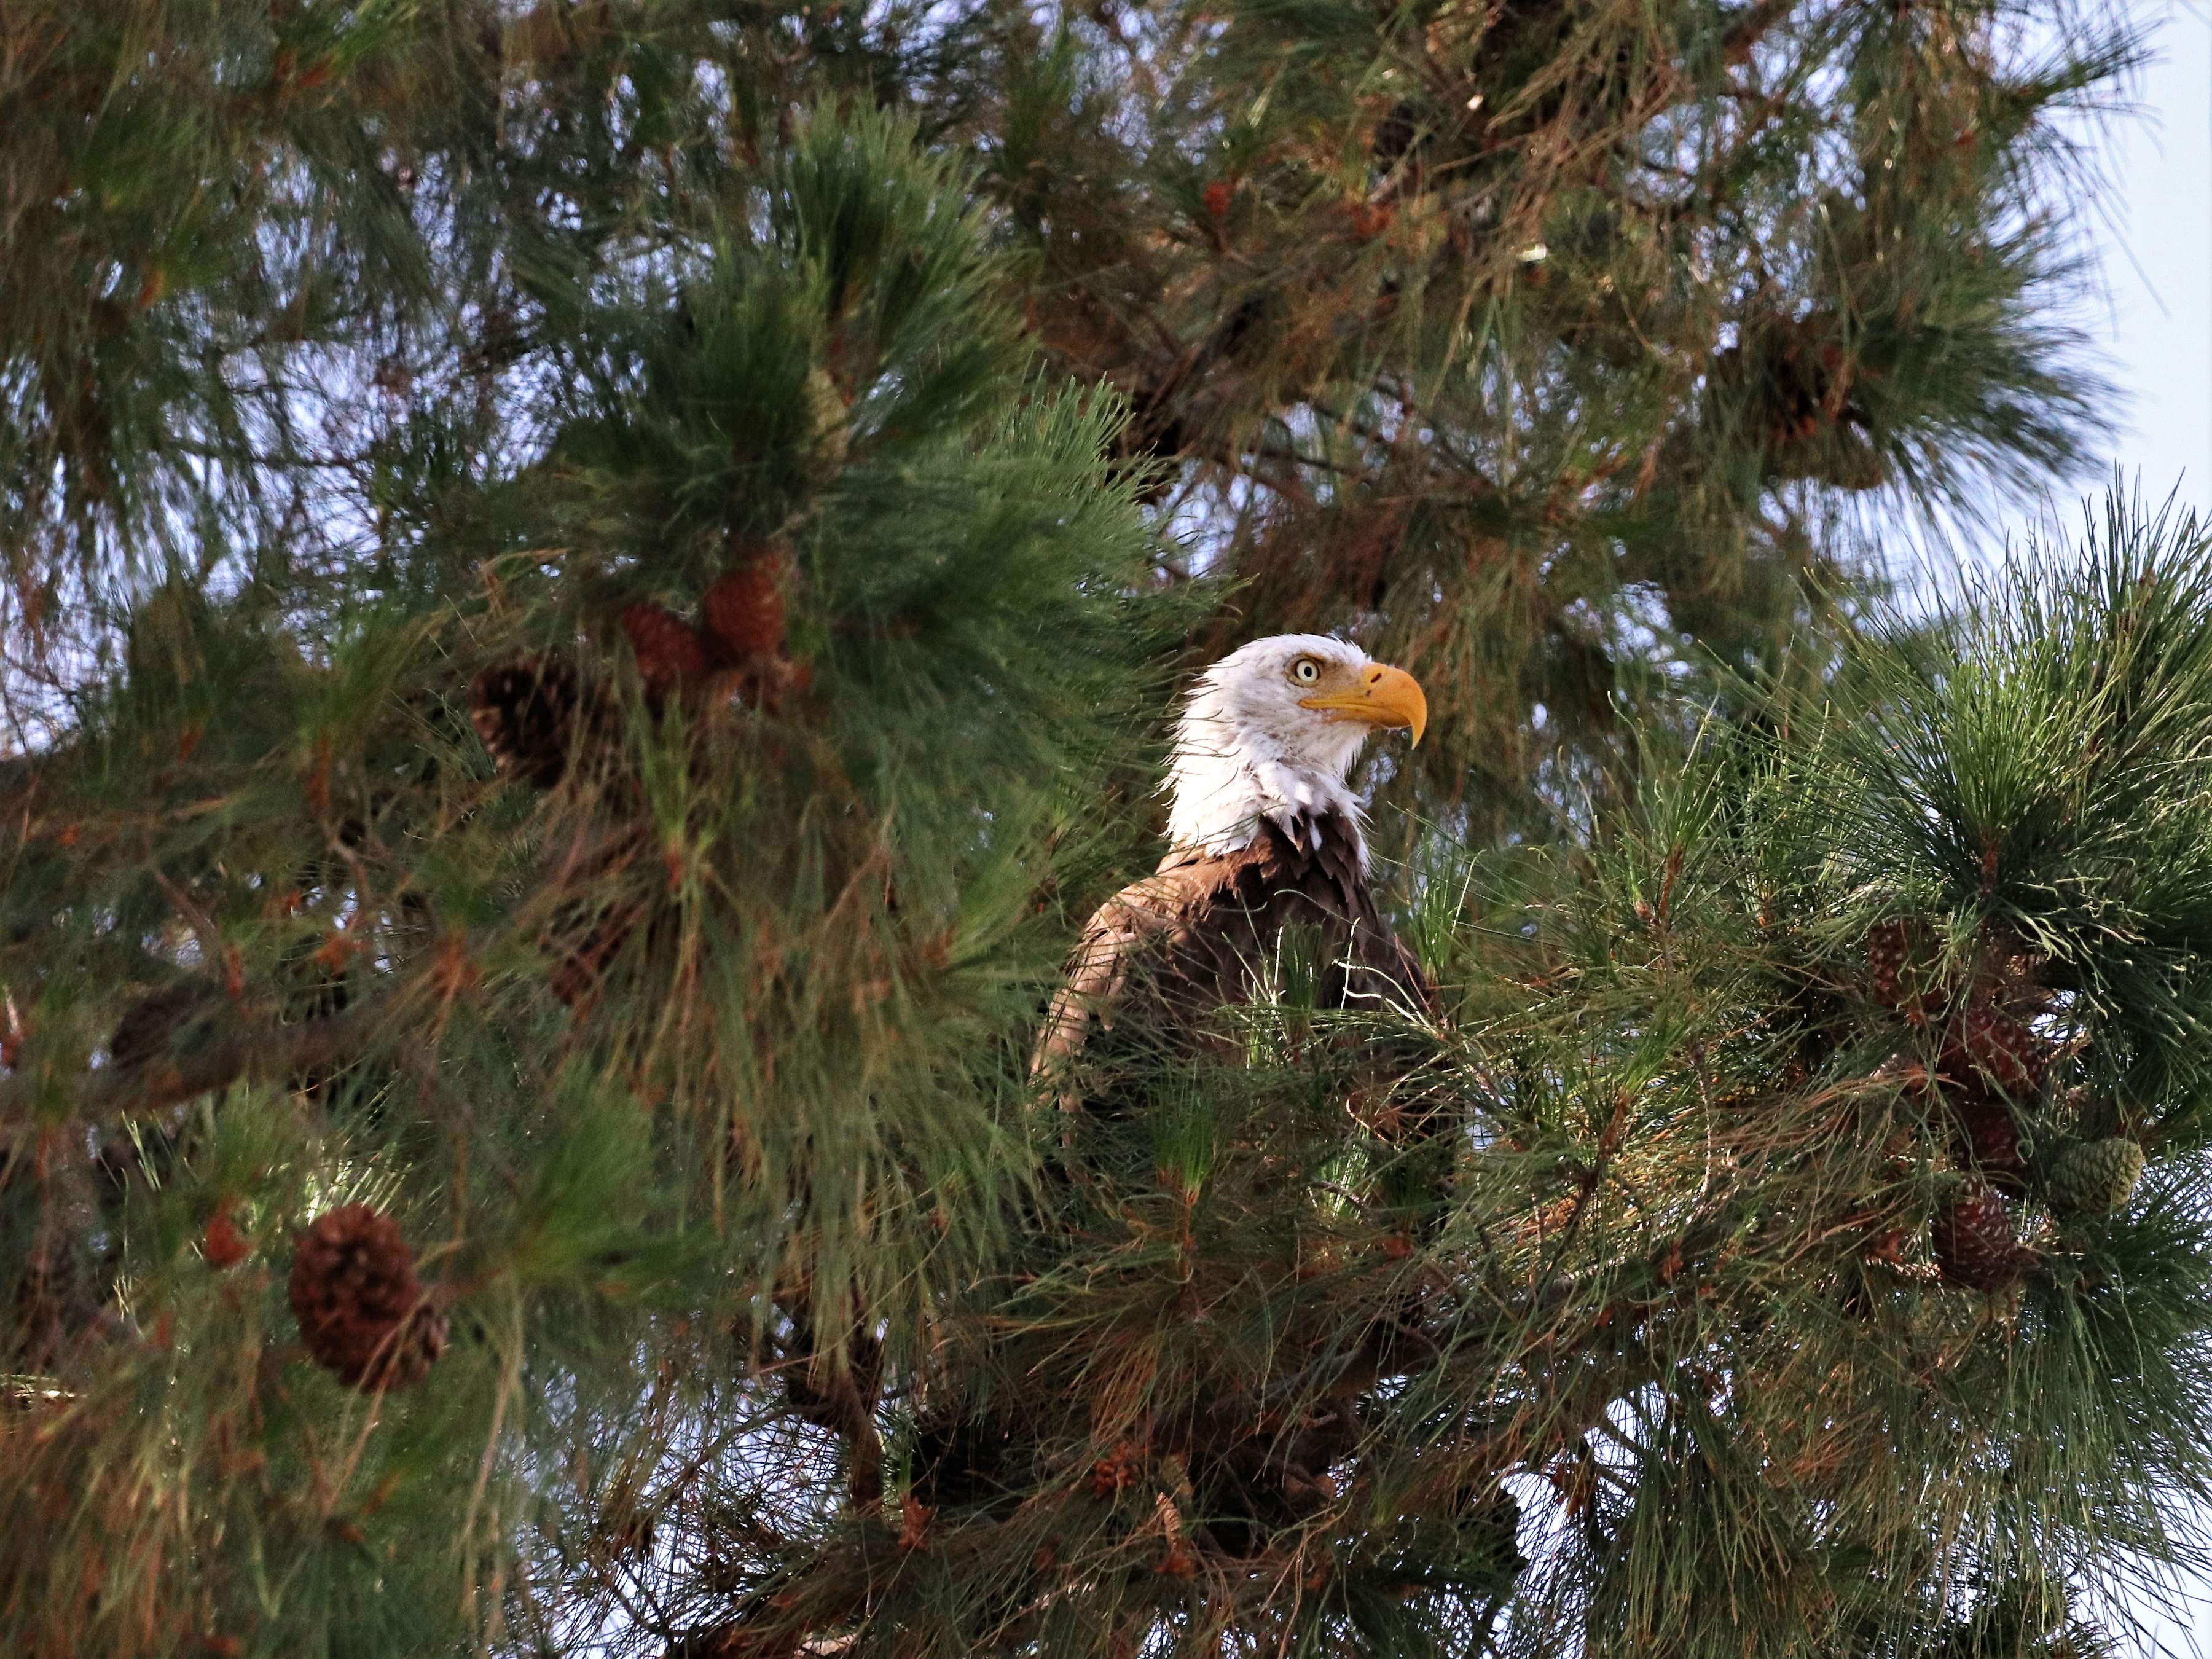 Photo by Sally Mesarosh  |  This bald eagle waited for a good period of time to leave the tree and swoop down into the nearby lake.